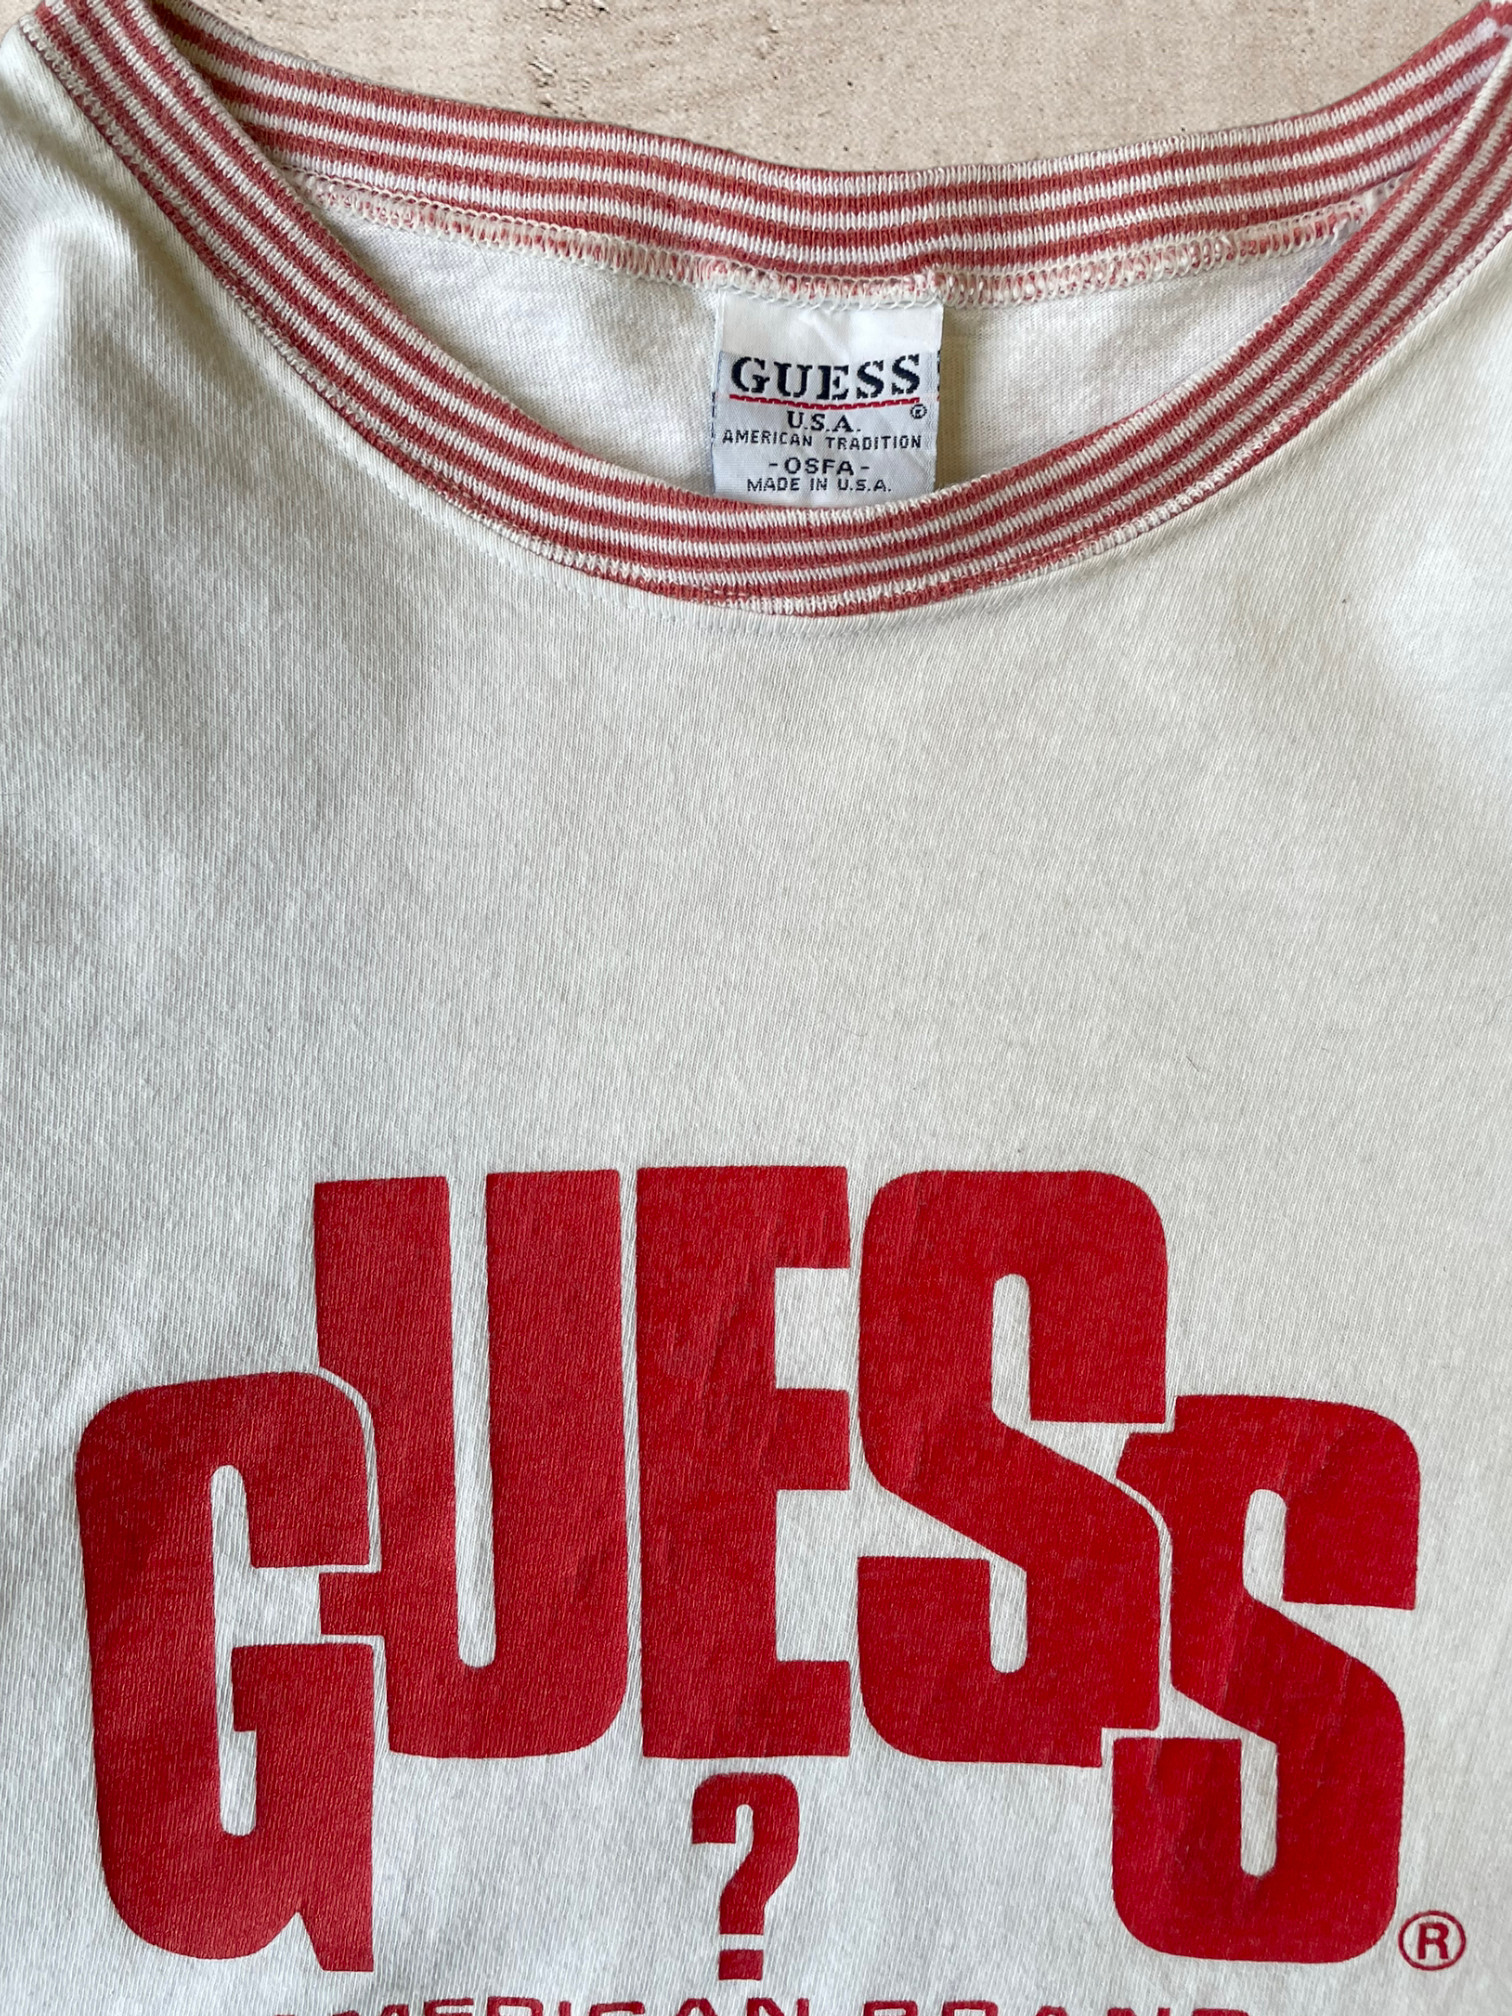 90s Guess Graphic T-Shirt - Large